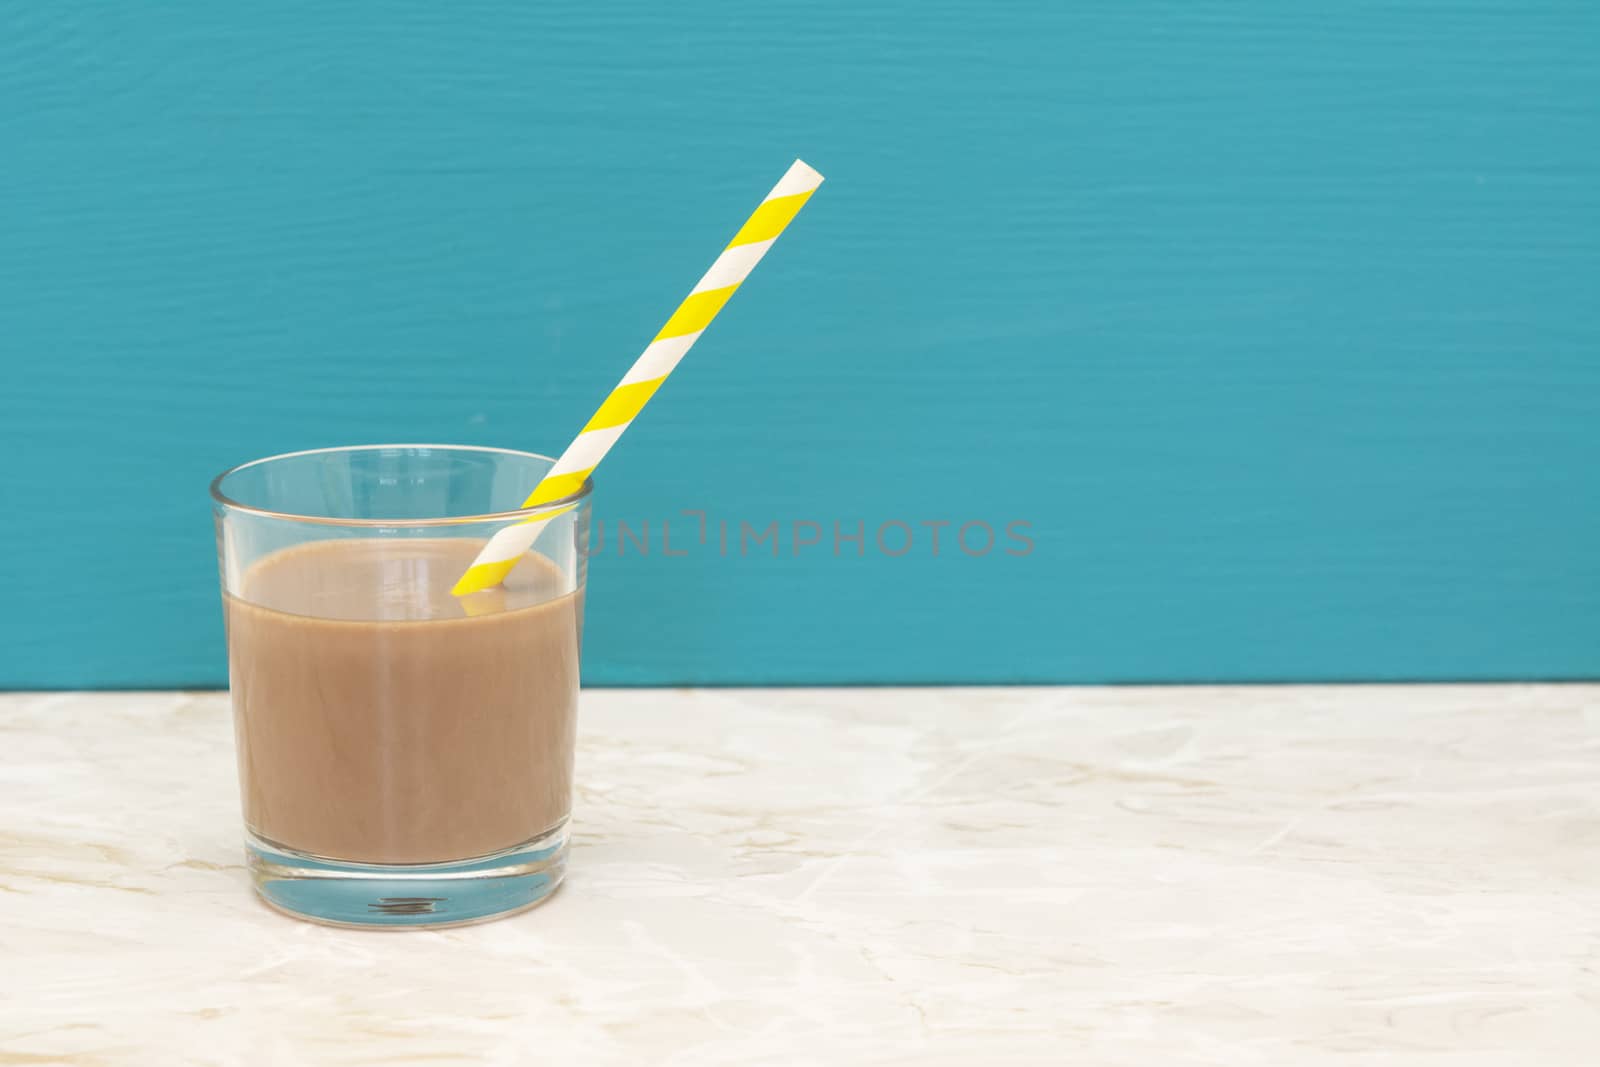 Thick chocolate milkshake with a retro paper straw in a glass tumbler with a teal background and copy space